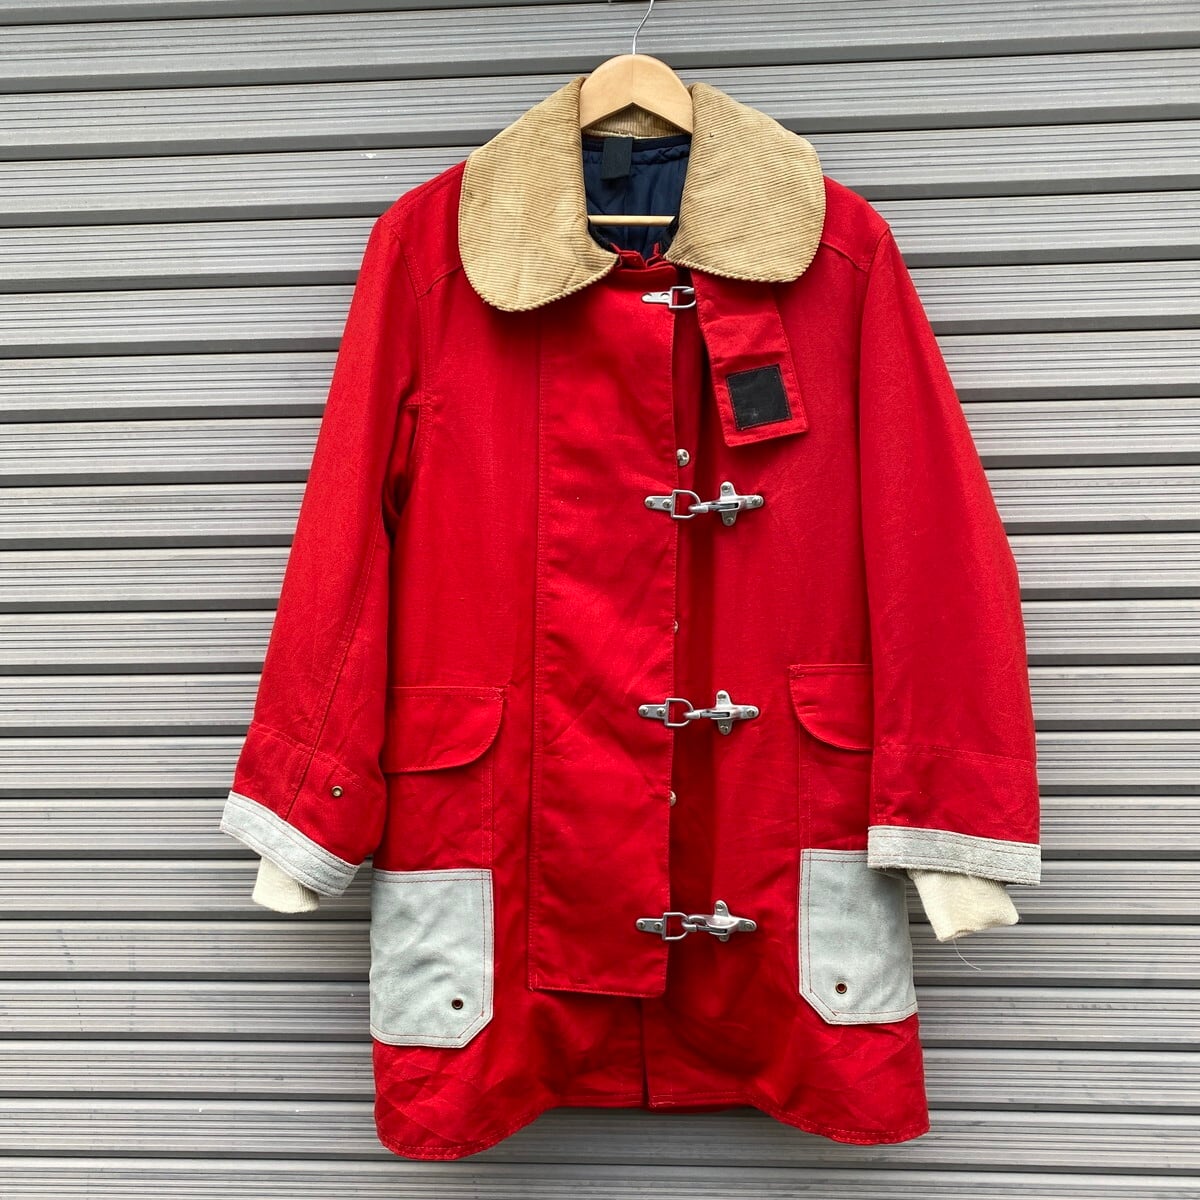 USA製 DENNIS SMITH FIREHOUSE COLLECTION TURNOUT COATファイヤーマンジャケット メンズM相当  ファイヤーマンフック コーデュロイ襟 レッド 古着 【ブルゾン・ジャケット】【AN20】 | cave 古着屋【公式】古着通販サイト